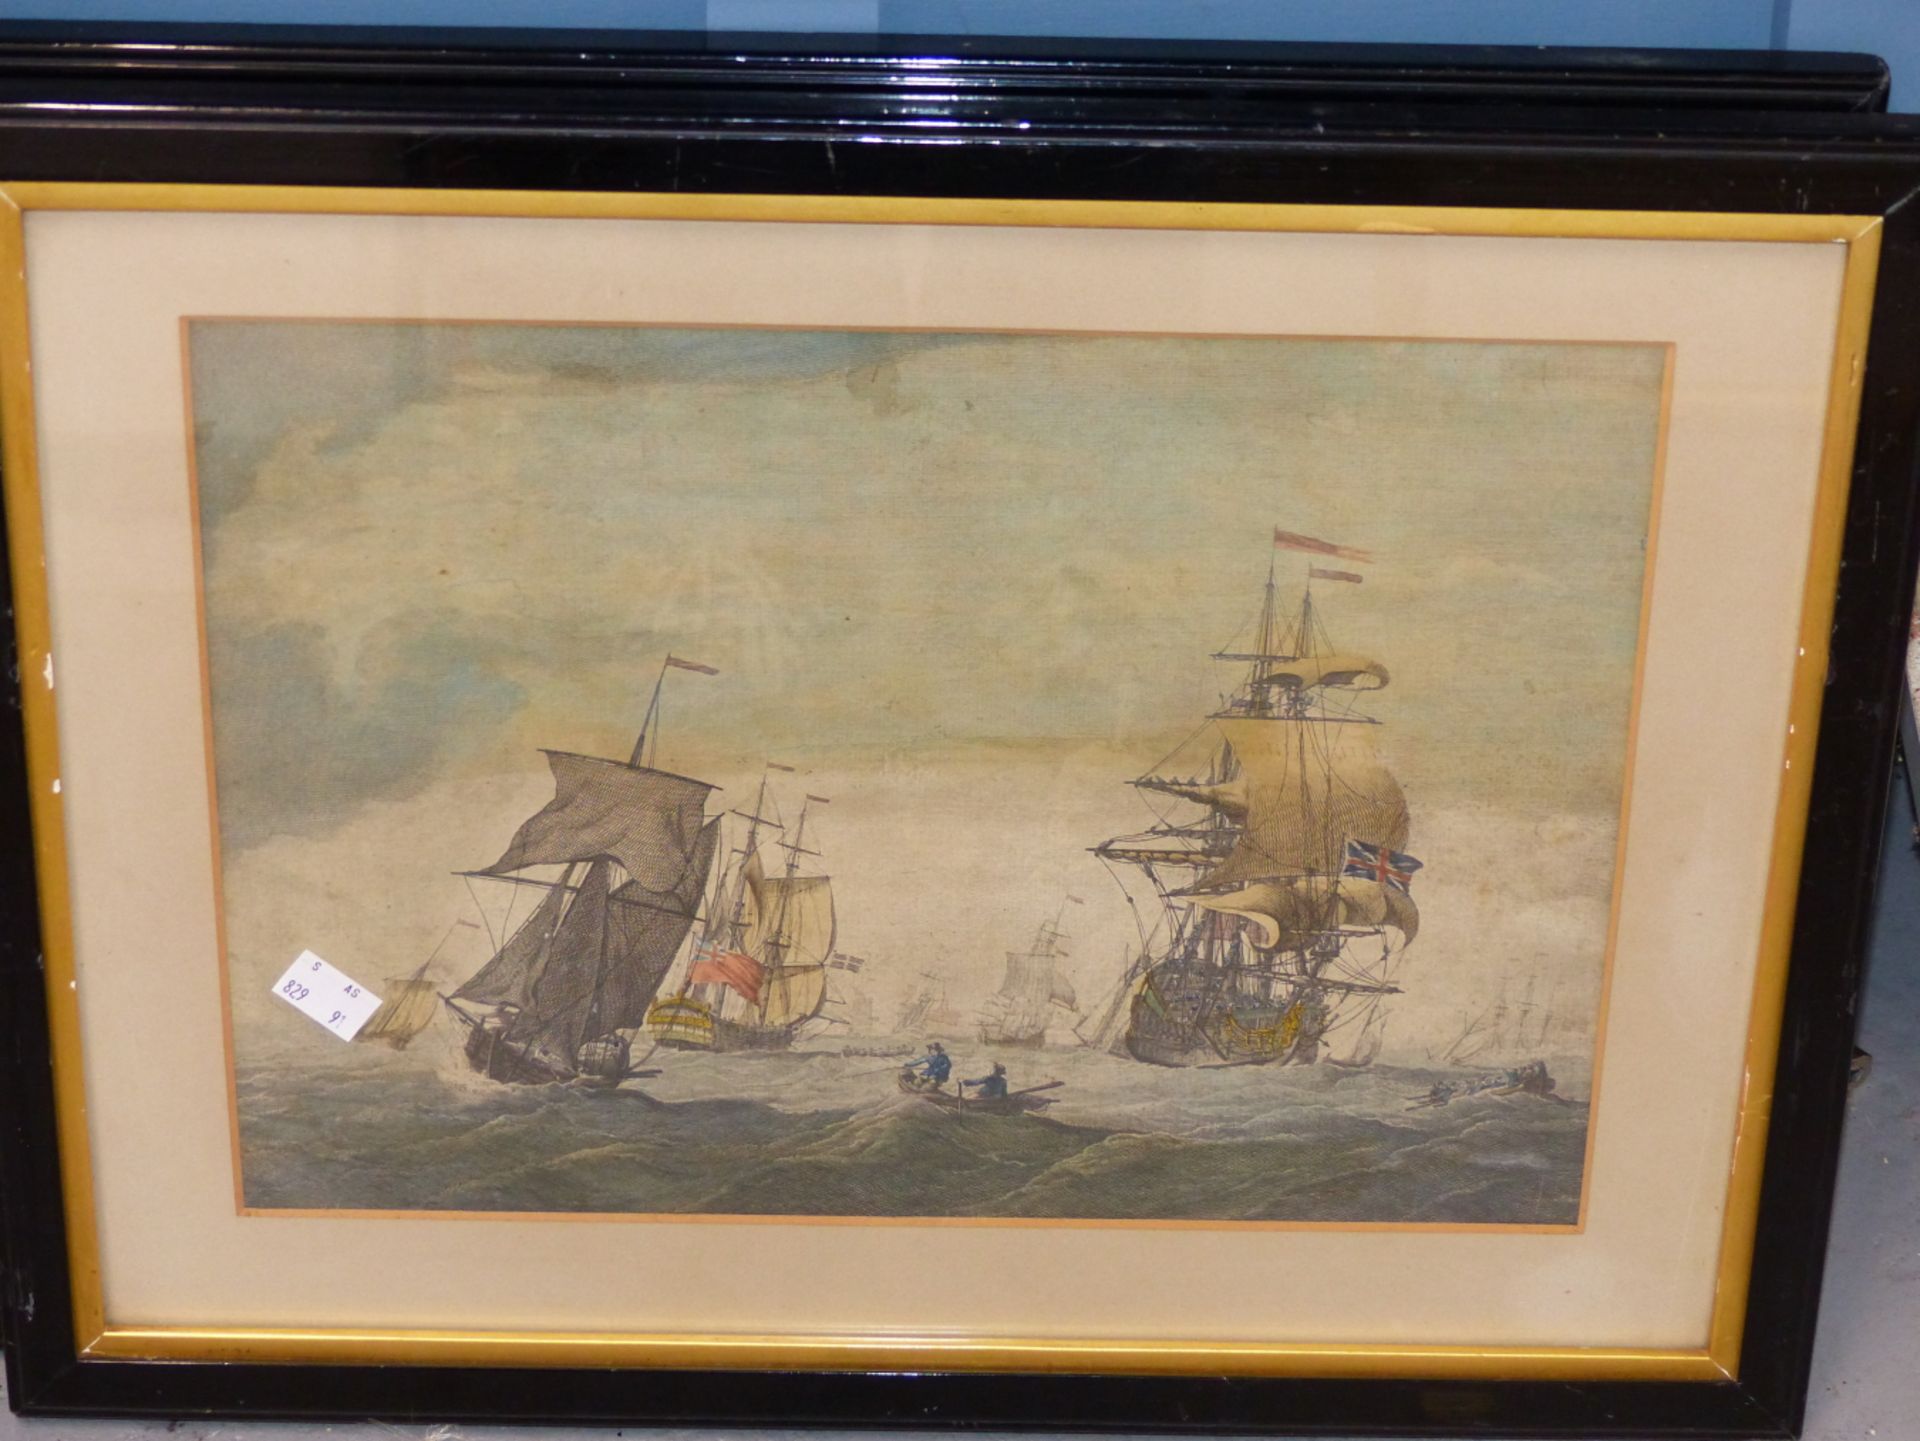 AFTER PETER MORNAY 1681-1749. 4 BRITISH MARITIME SCENES. AQUATINT ENGRAVINGS, PUBLISHED J. BOWLES - Image 3 of 5